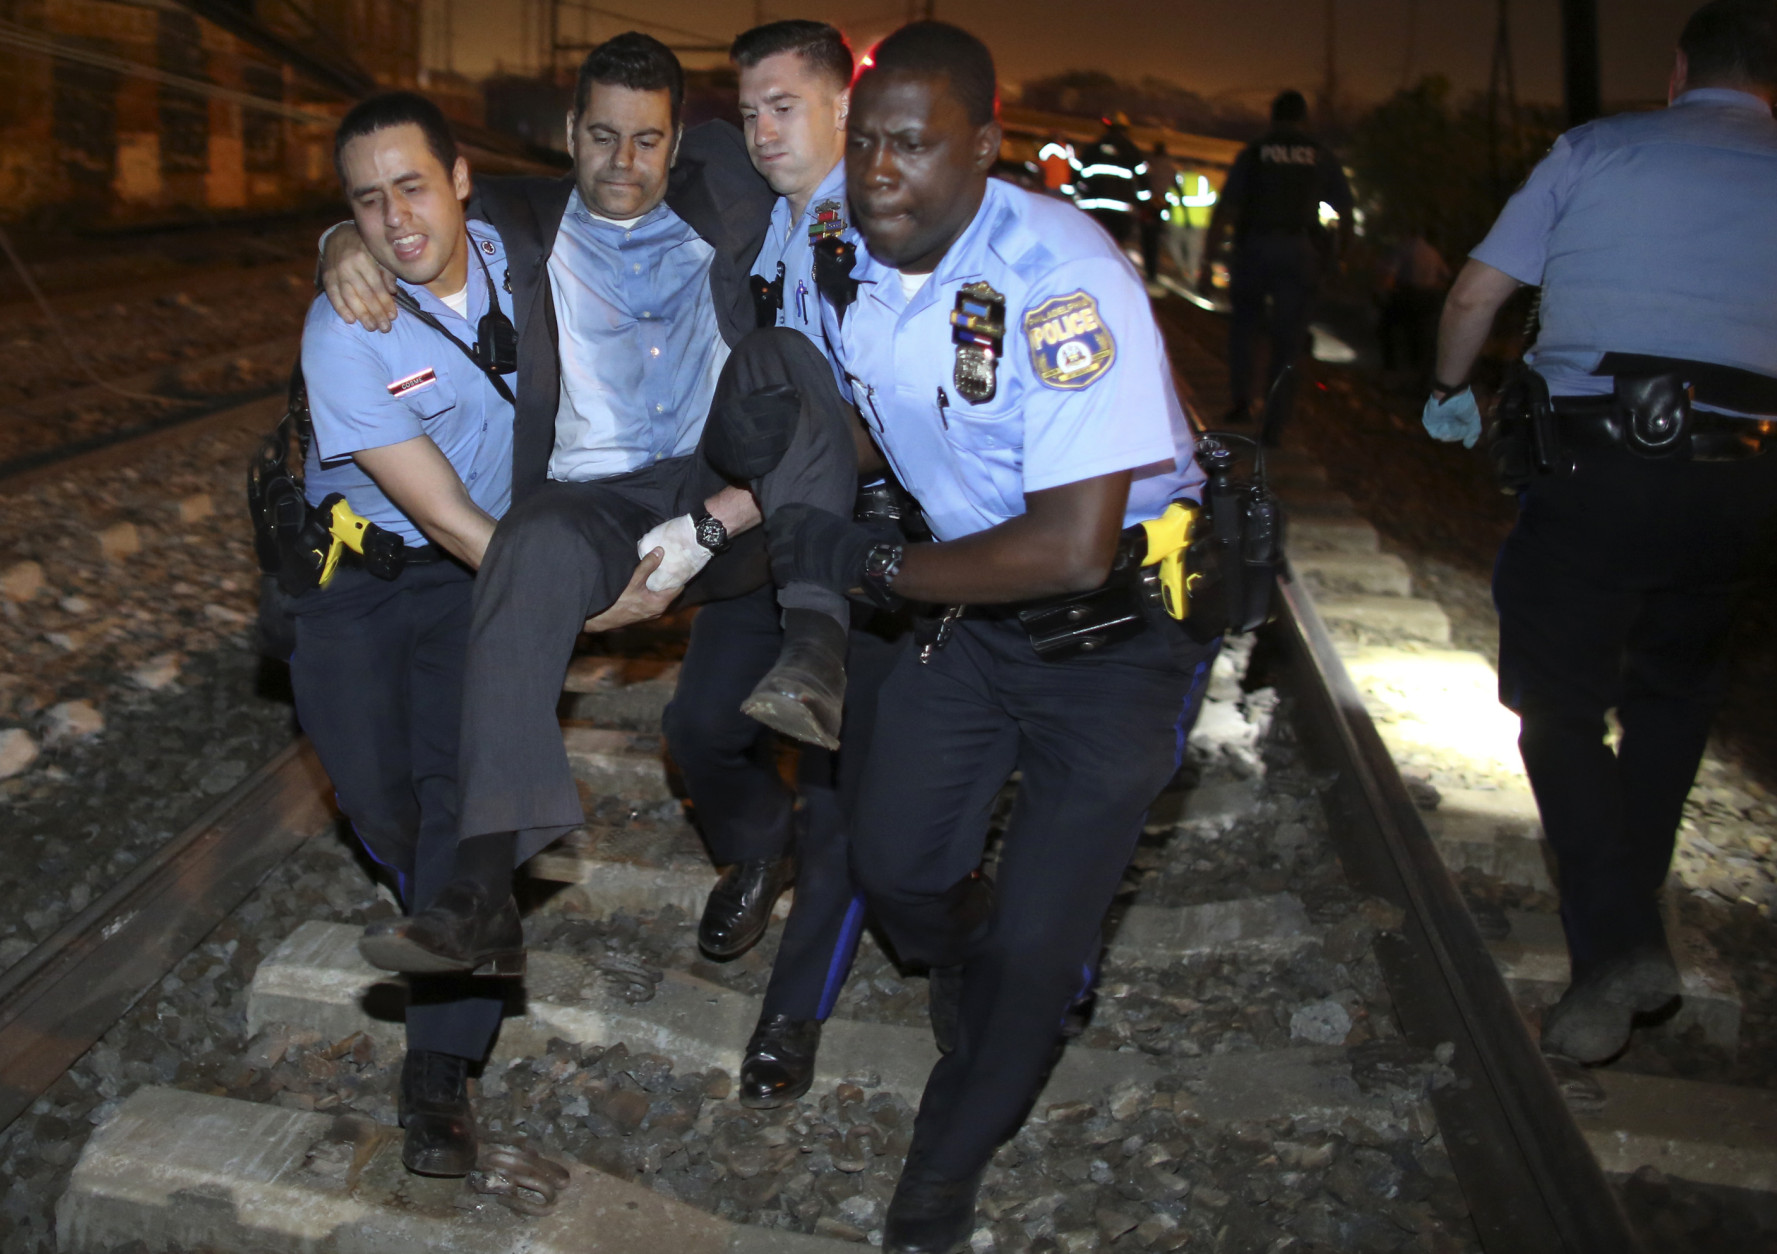 Emergency personnel help a passenger at the scene of a train wreck, Tuesday, May 12, 2015, in Philadelphia. An Amtrak train headed to New York City derailed and crashed in Philadelphia. (AP Photo/Joseph Kaczmarek)